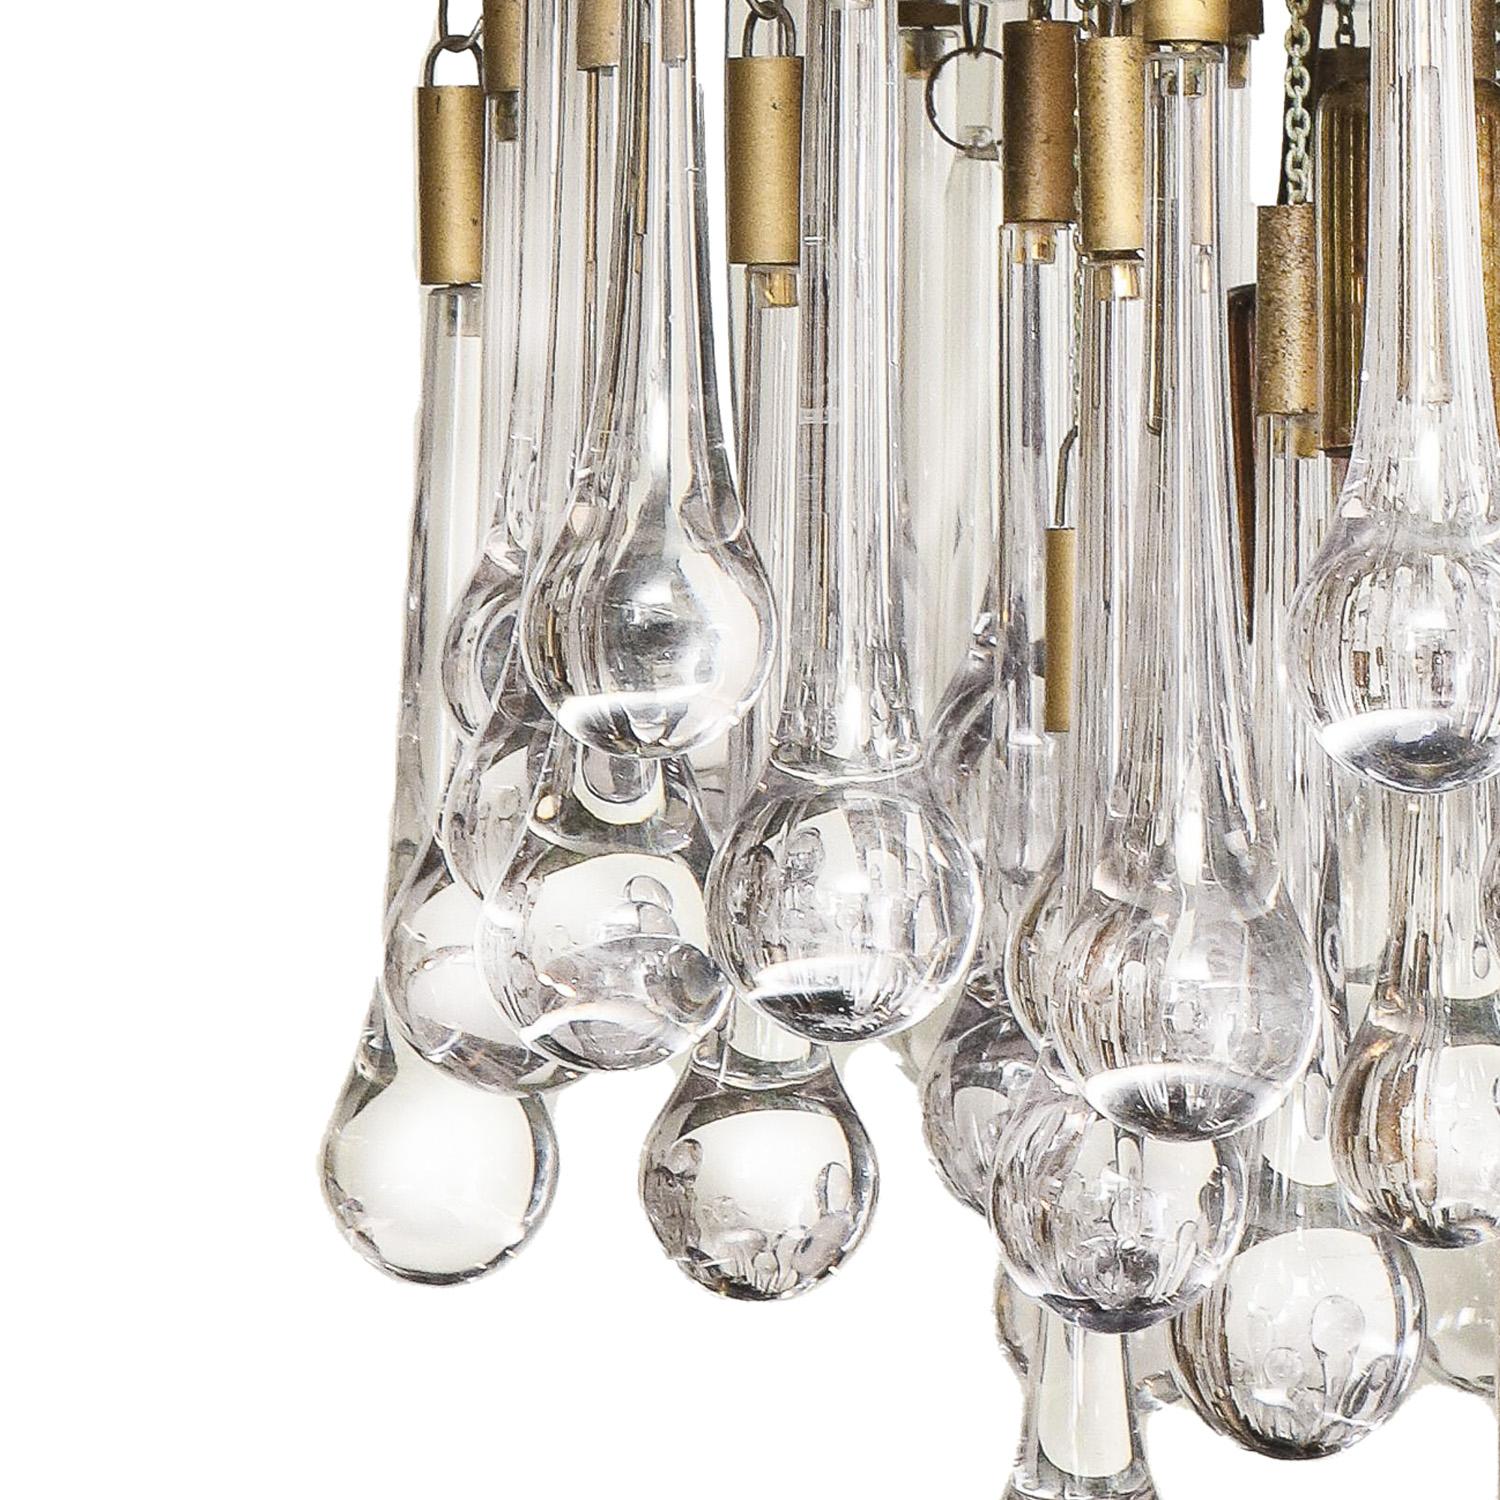 Exceptional Murano glass pendant with Venini tear drops and brass frame by Willy Rizzo for BD Lumica, Italy 1970's. A remarkable chandelier with hand-blown glass and cubist frame.

Matching sconces available. 